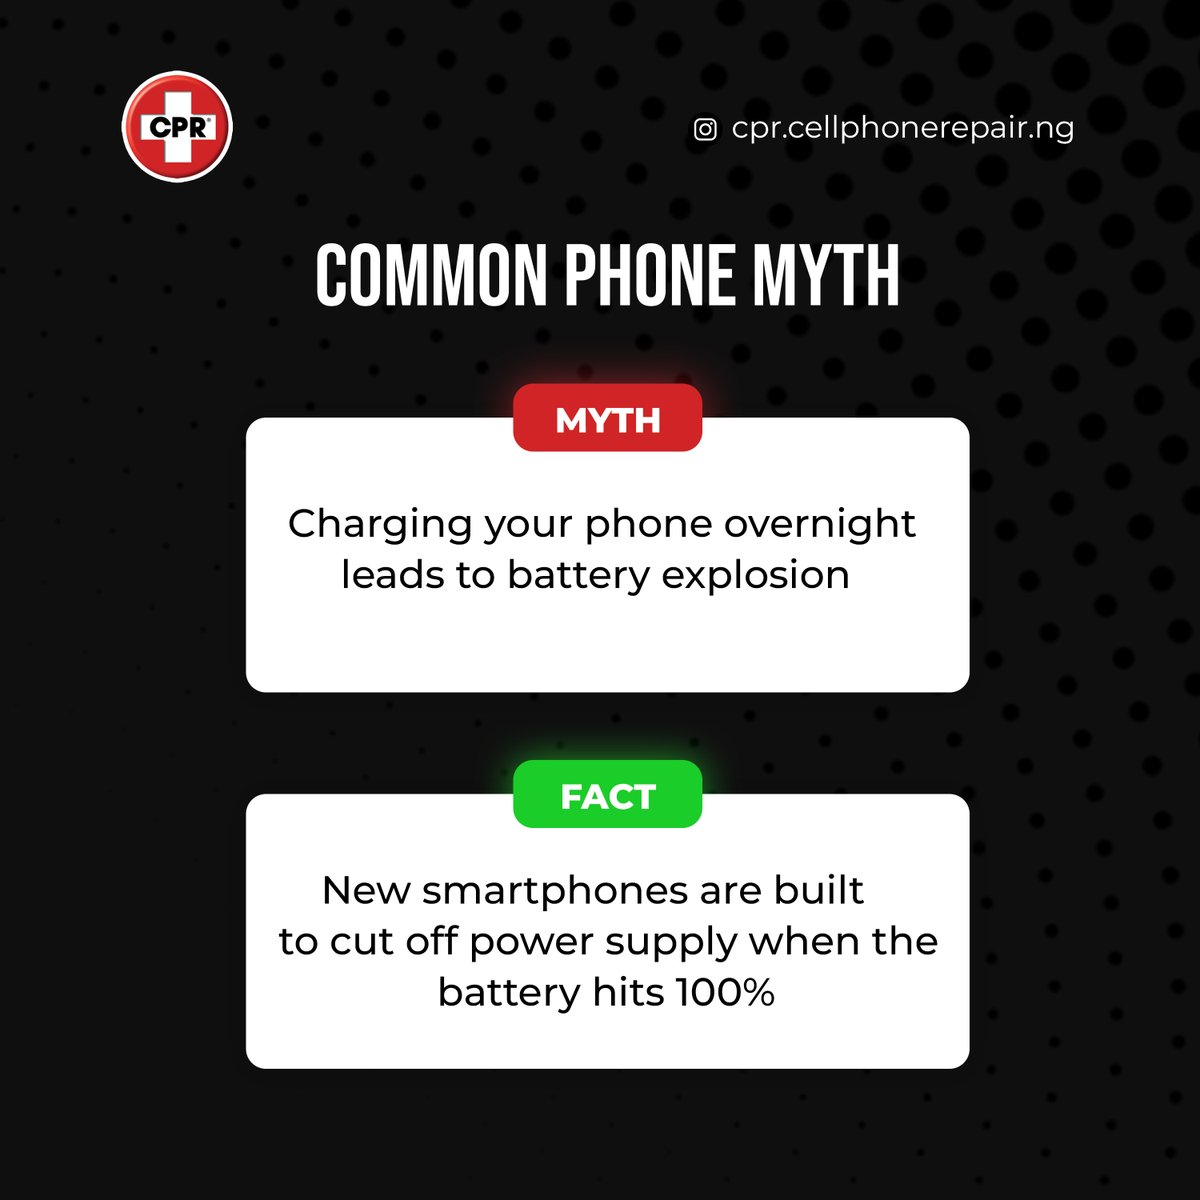 Don't lose sleep over your plugged phone. It has powerful safety circuits to prevent overcharging. So go ahead, charge overnight, and wake up to a fully charged phone. Share this post and help us debunk common phone myths! Follow CPR for more exciting phone facts. #CPR